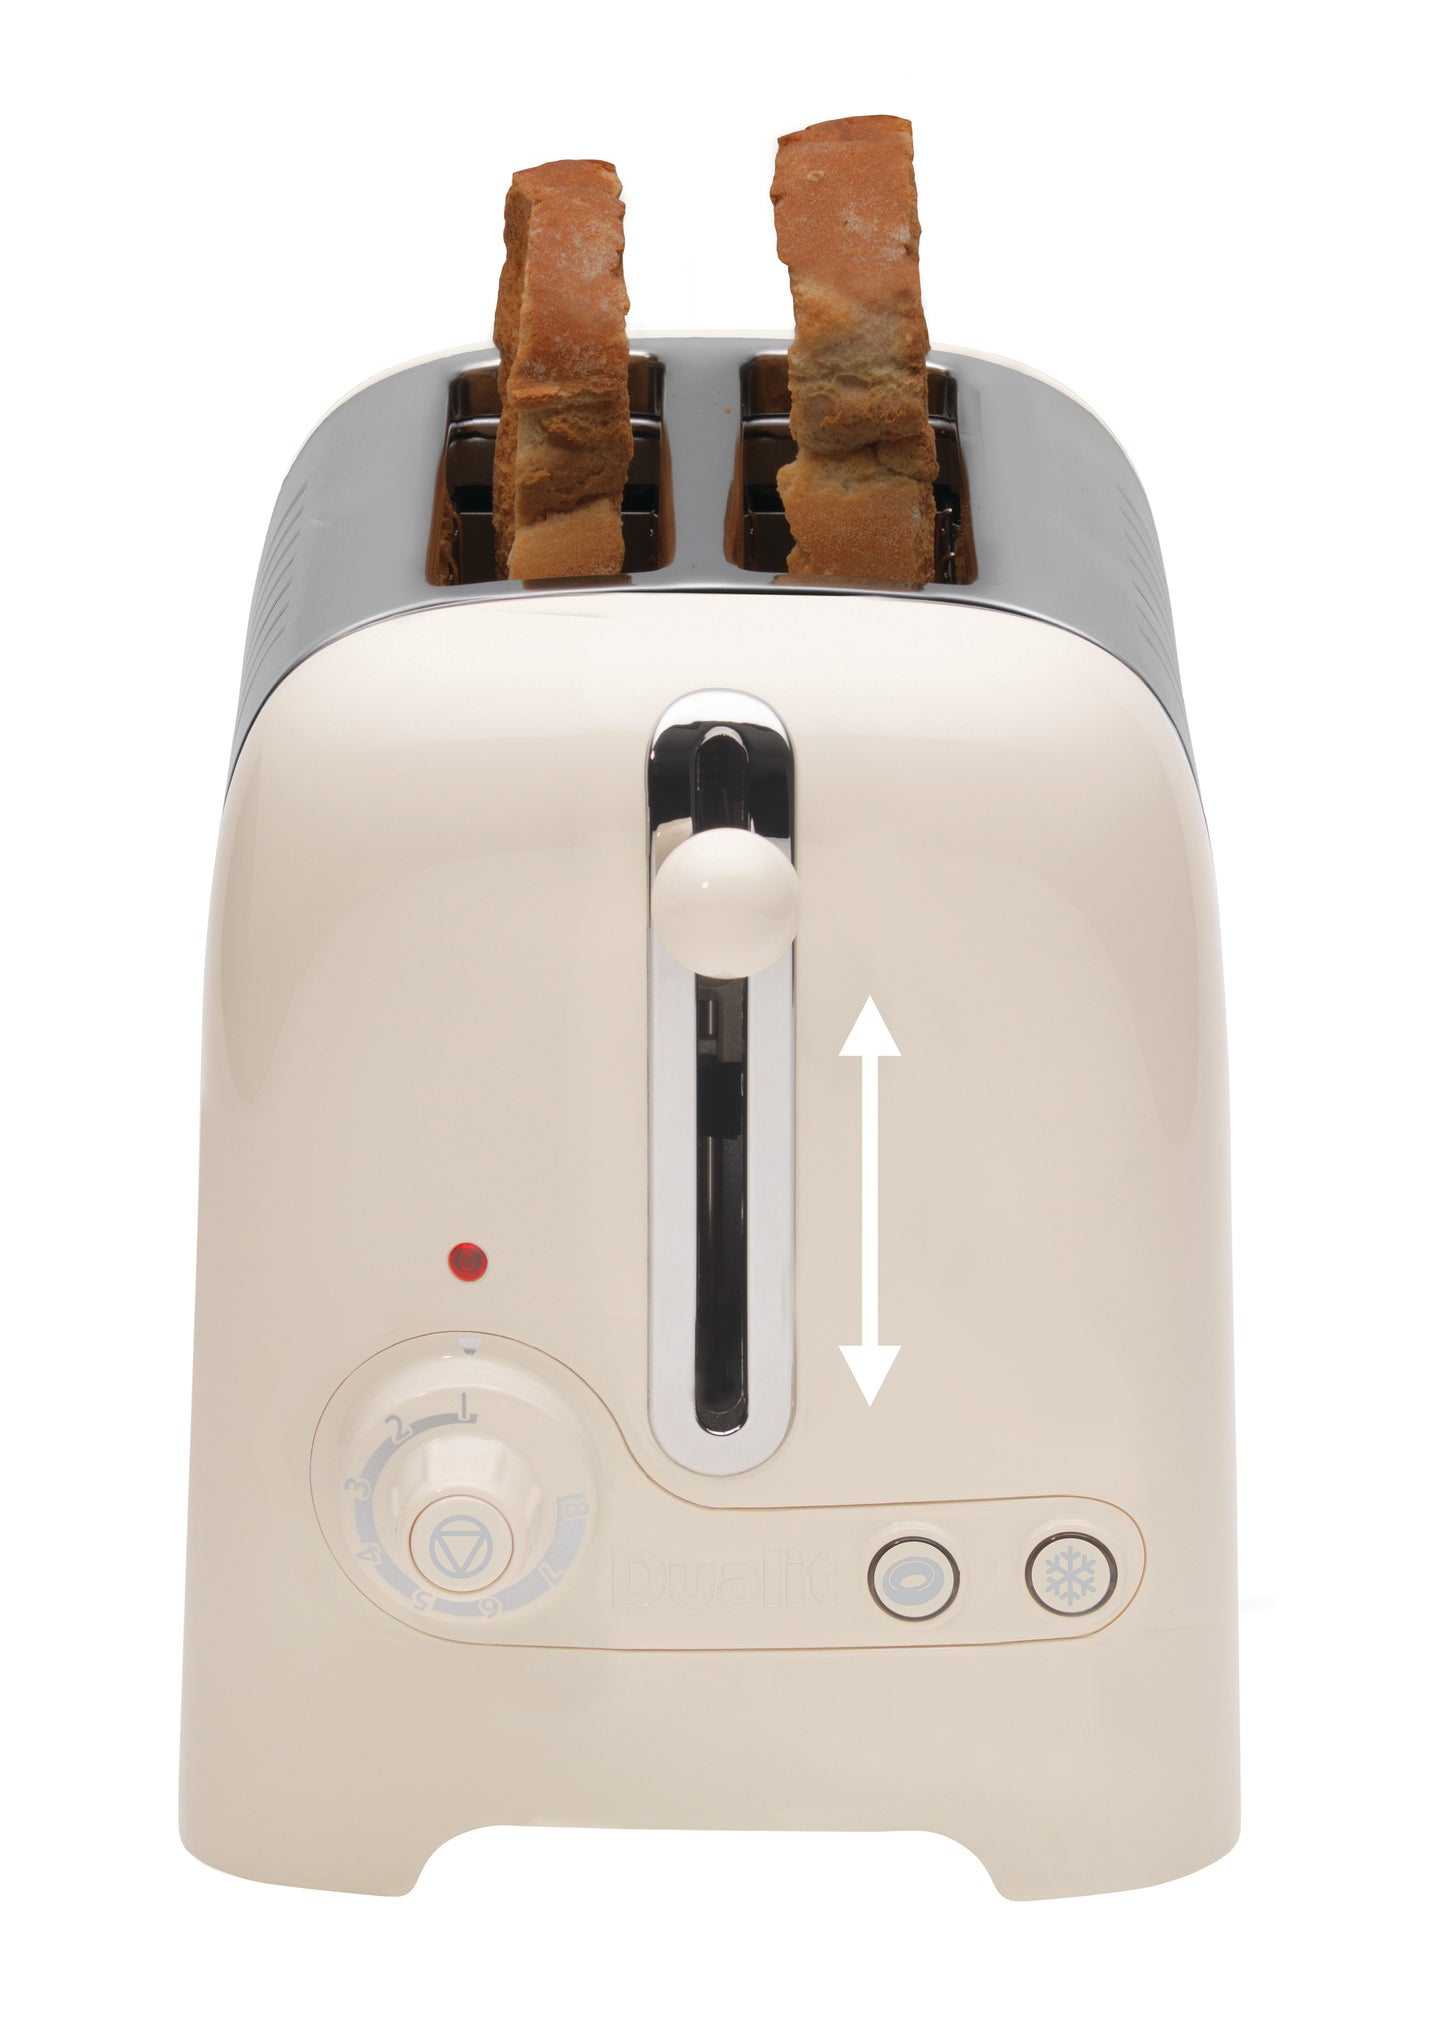 Dualit Toaster LITE Gloss Canvas